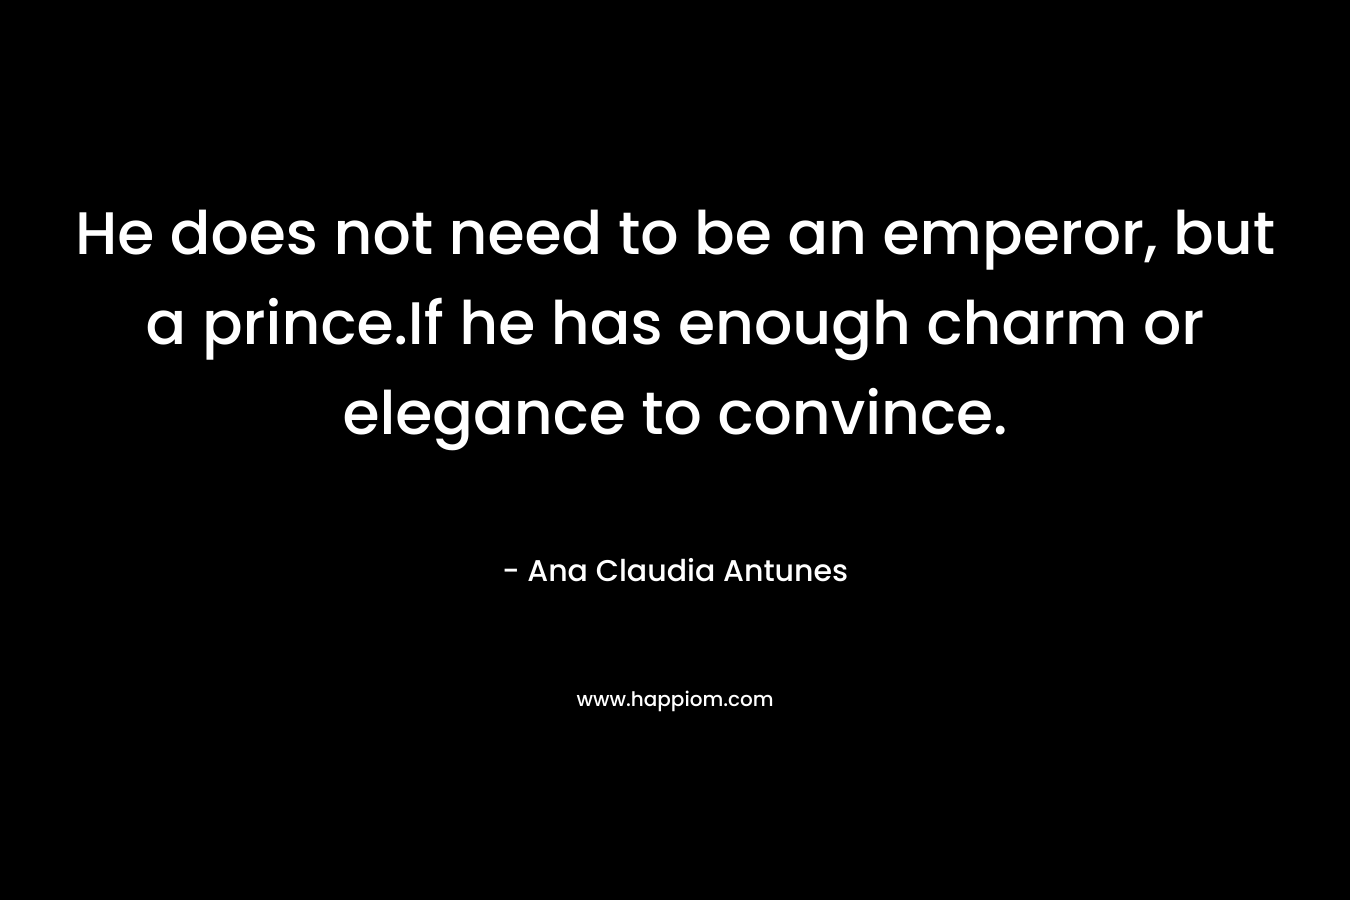 He does not need to be an emperor, but a prince.If he has enough charm or elegance to convince.